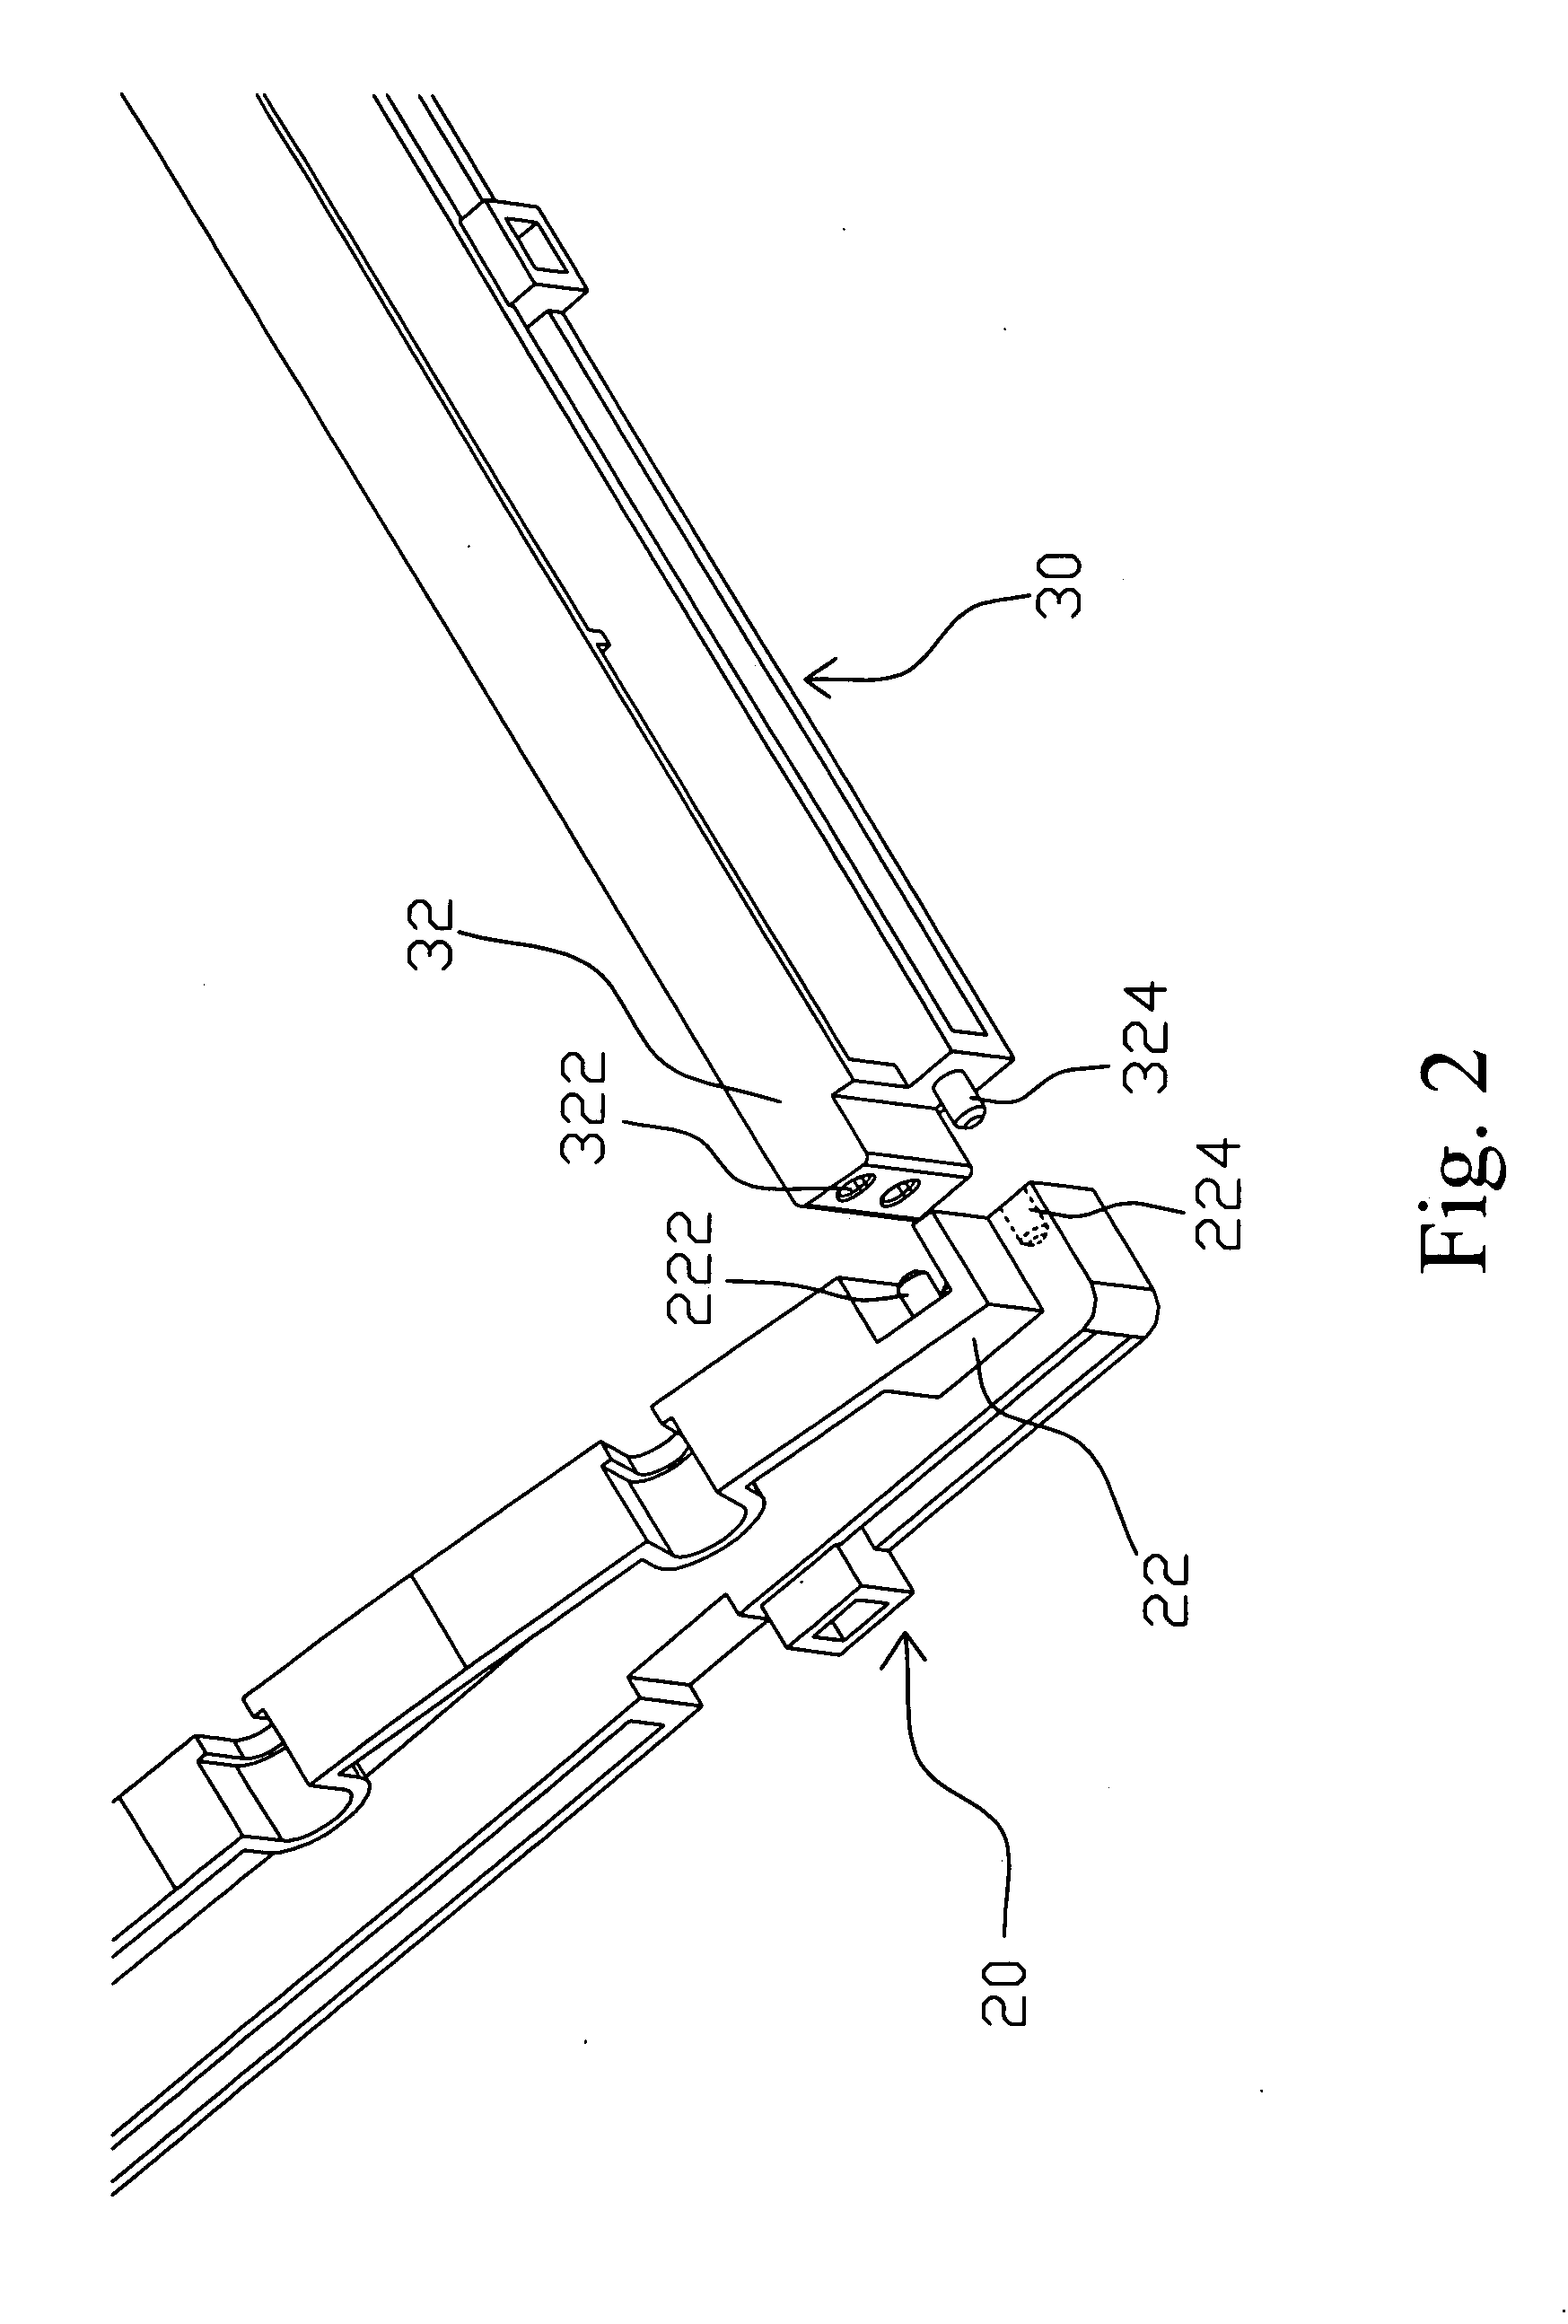 Assembly structure of a back light module